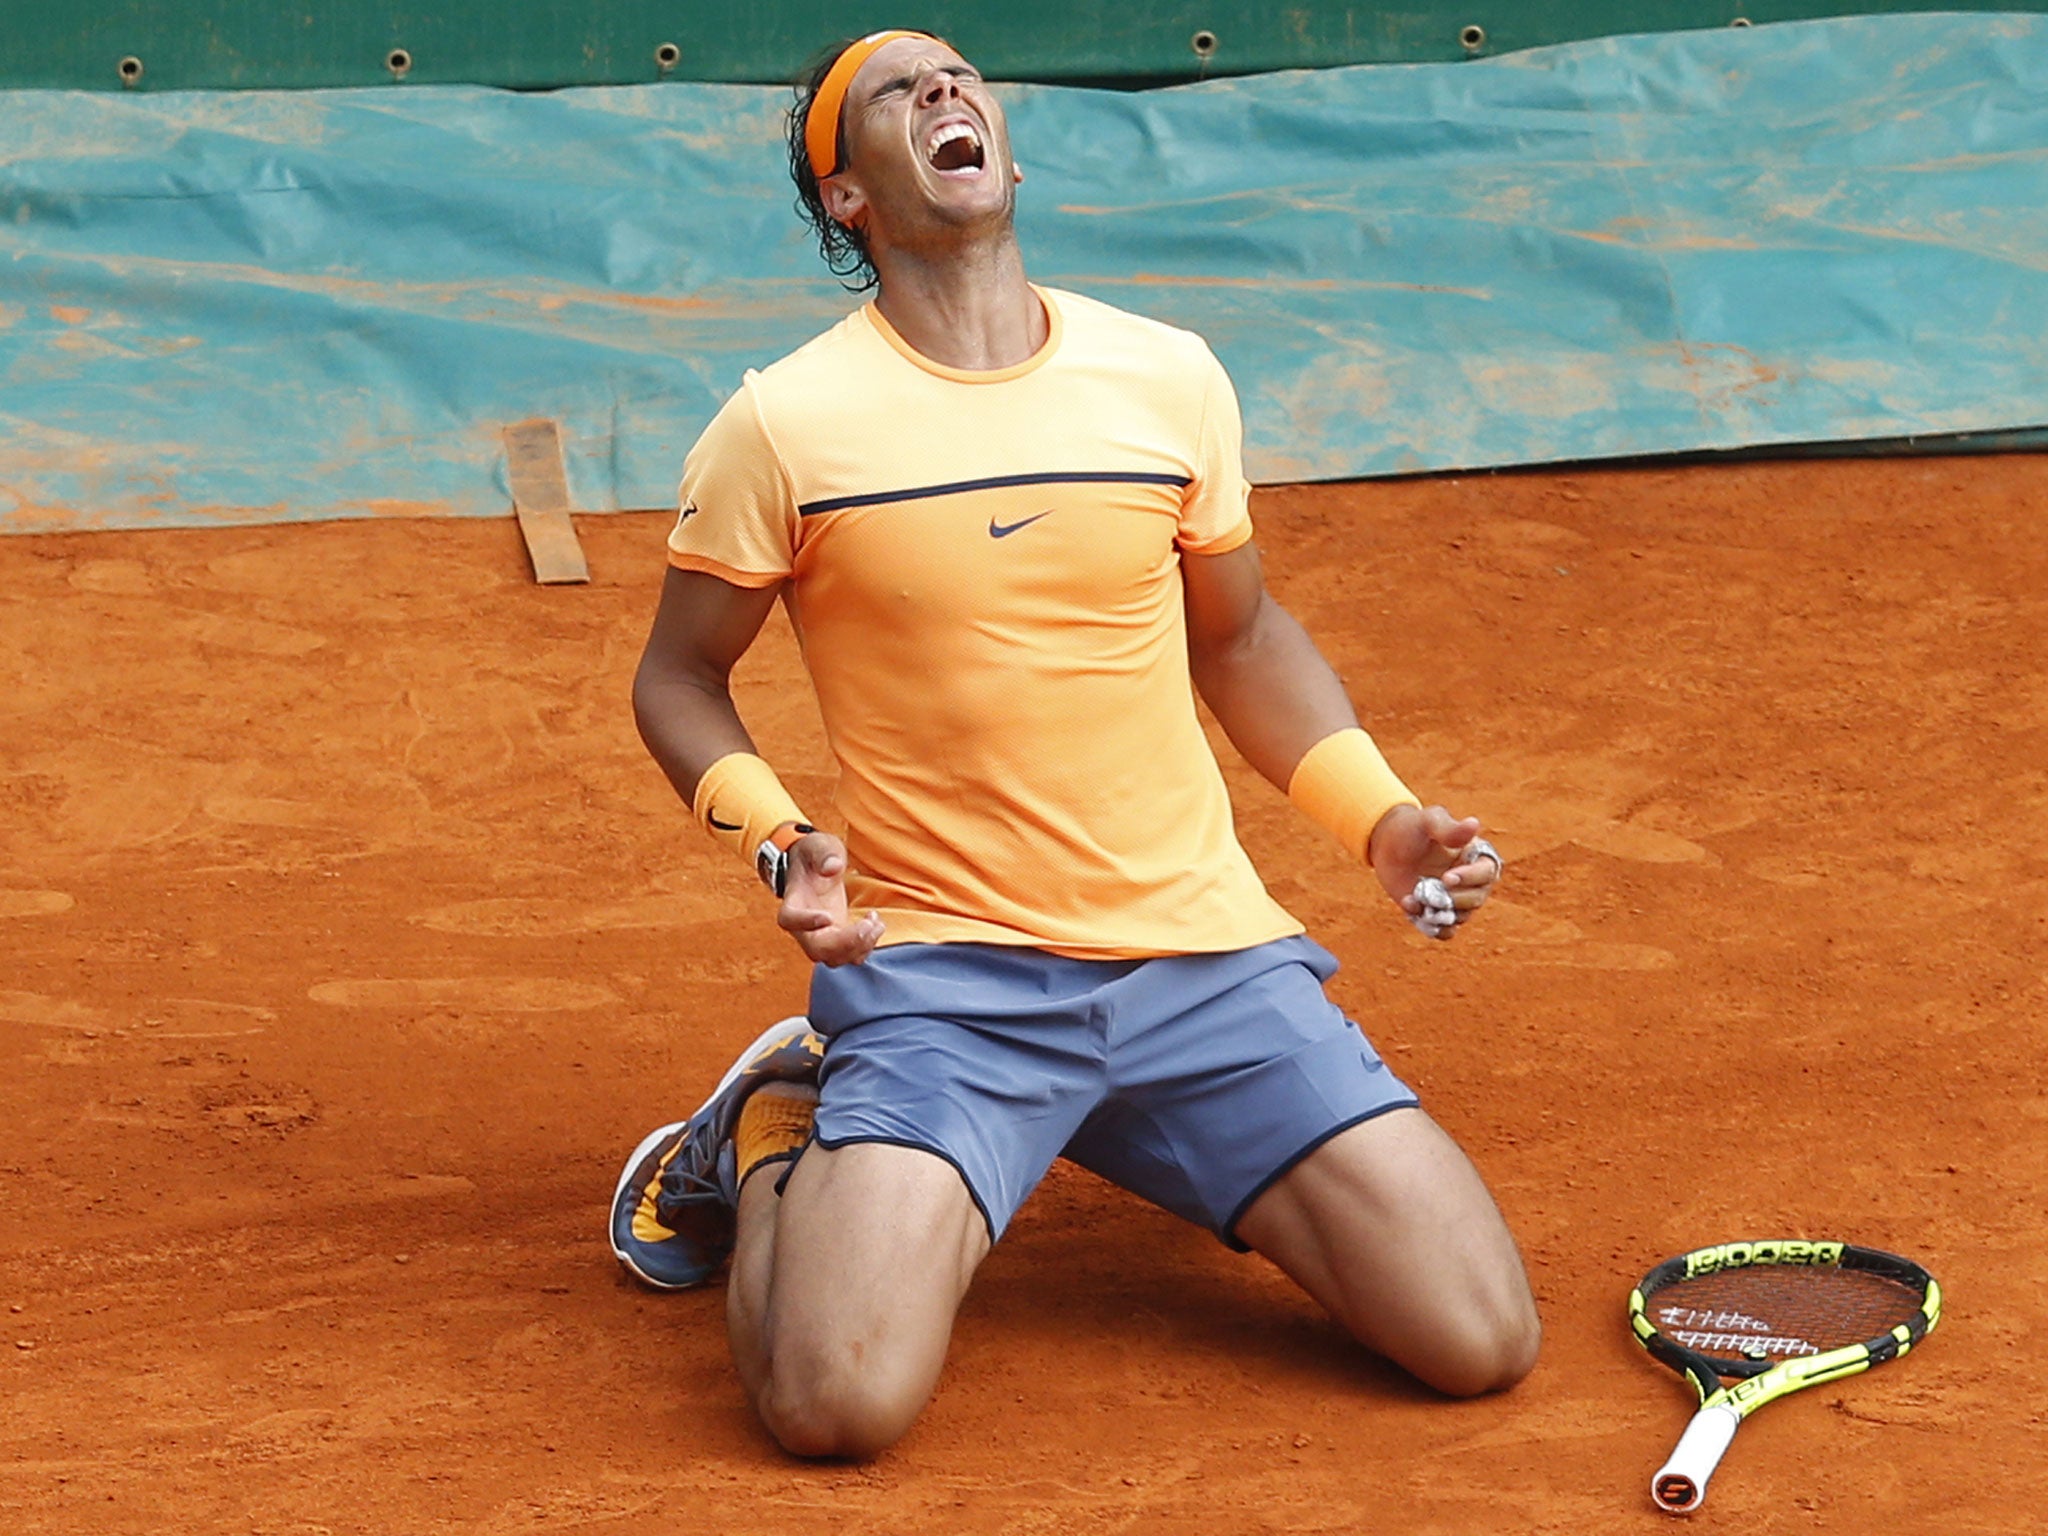 Monte Carlo Masters Rafael Nadal proves he is still King of Clay with